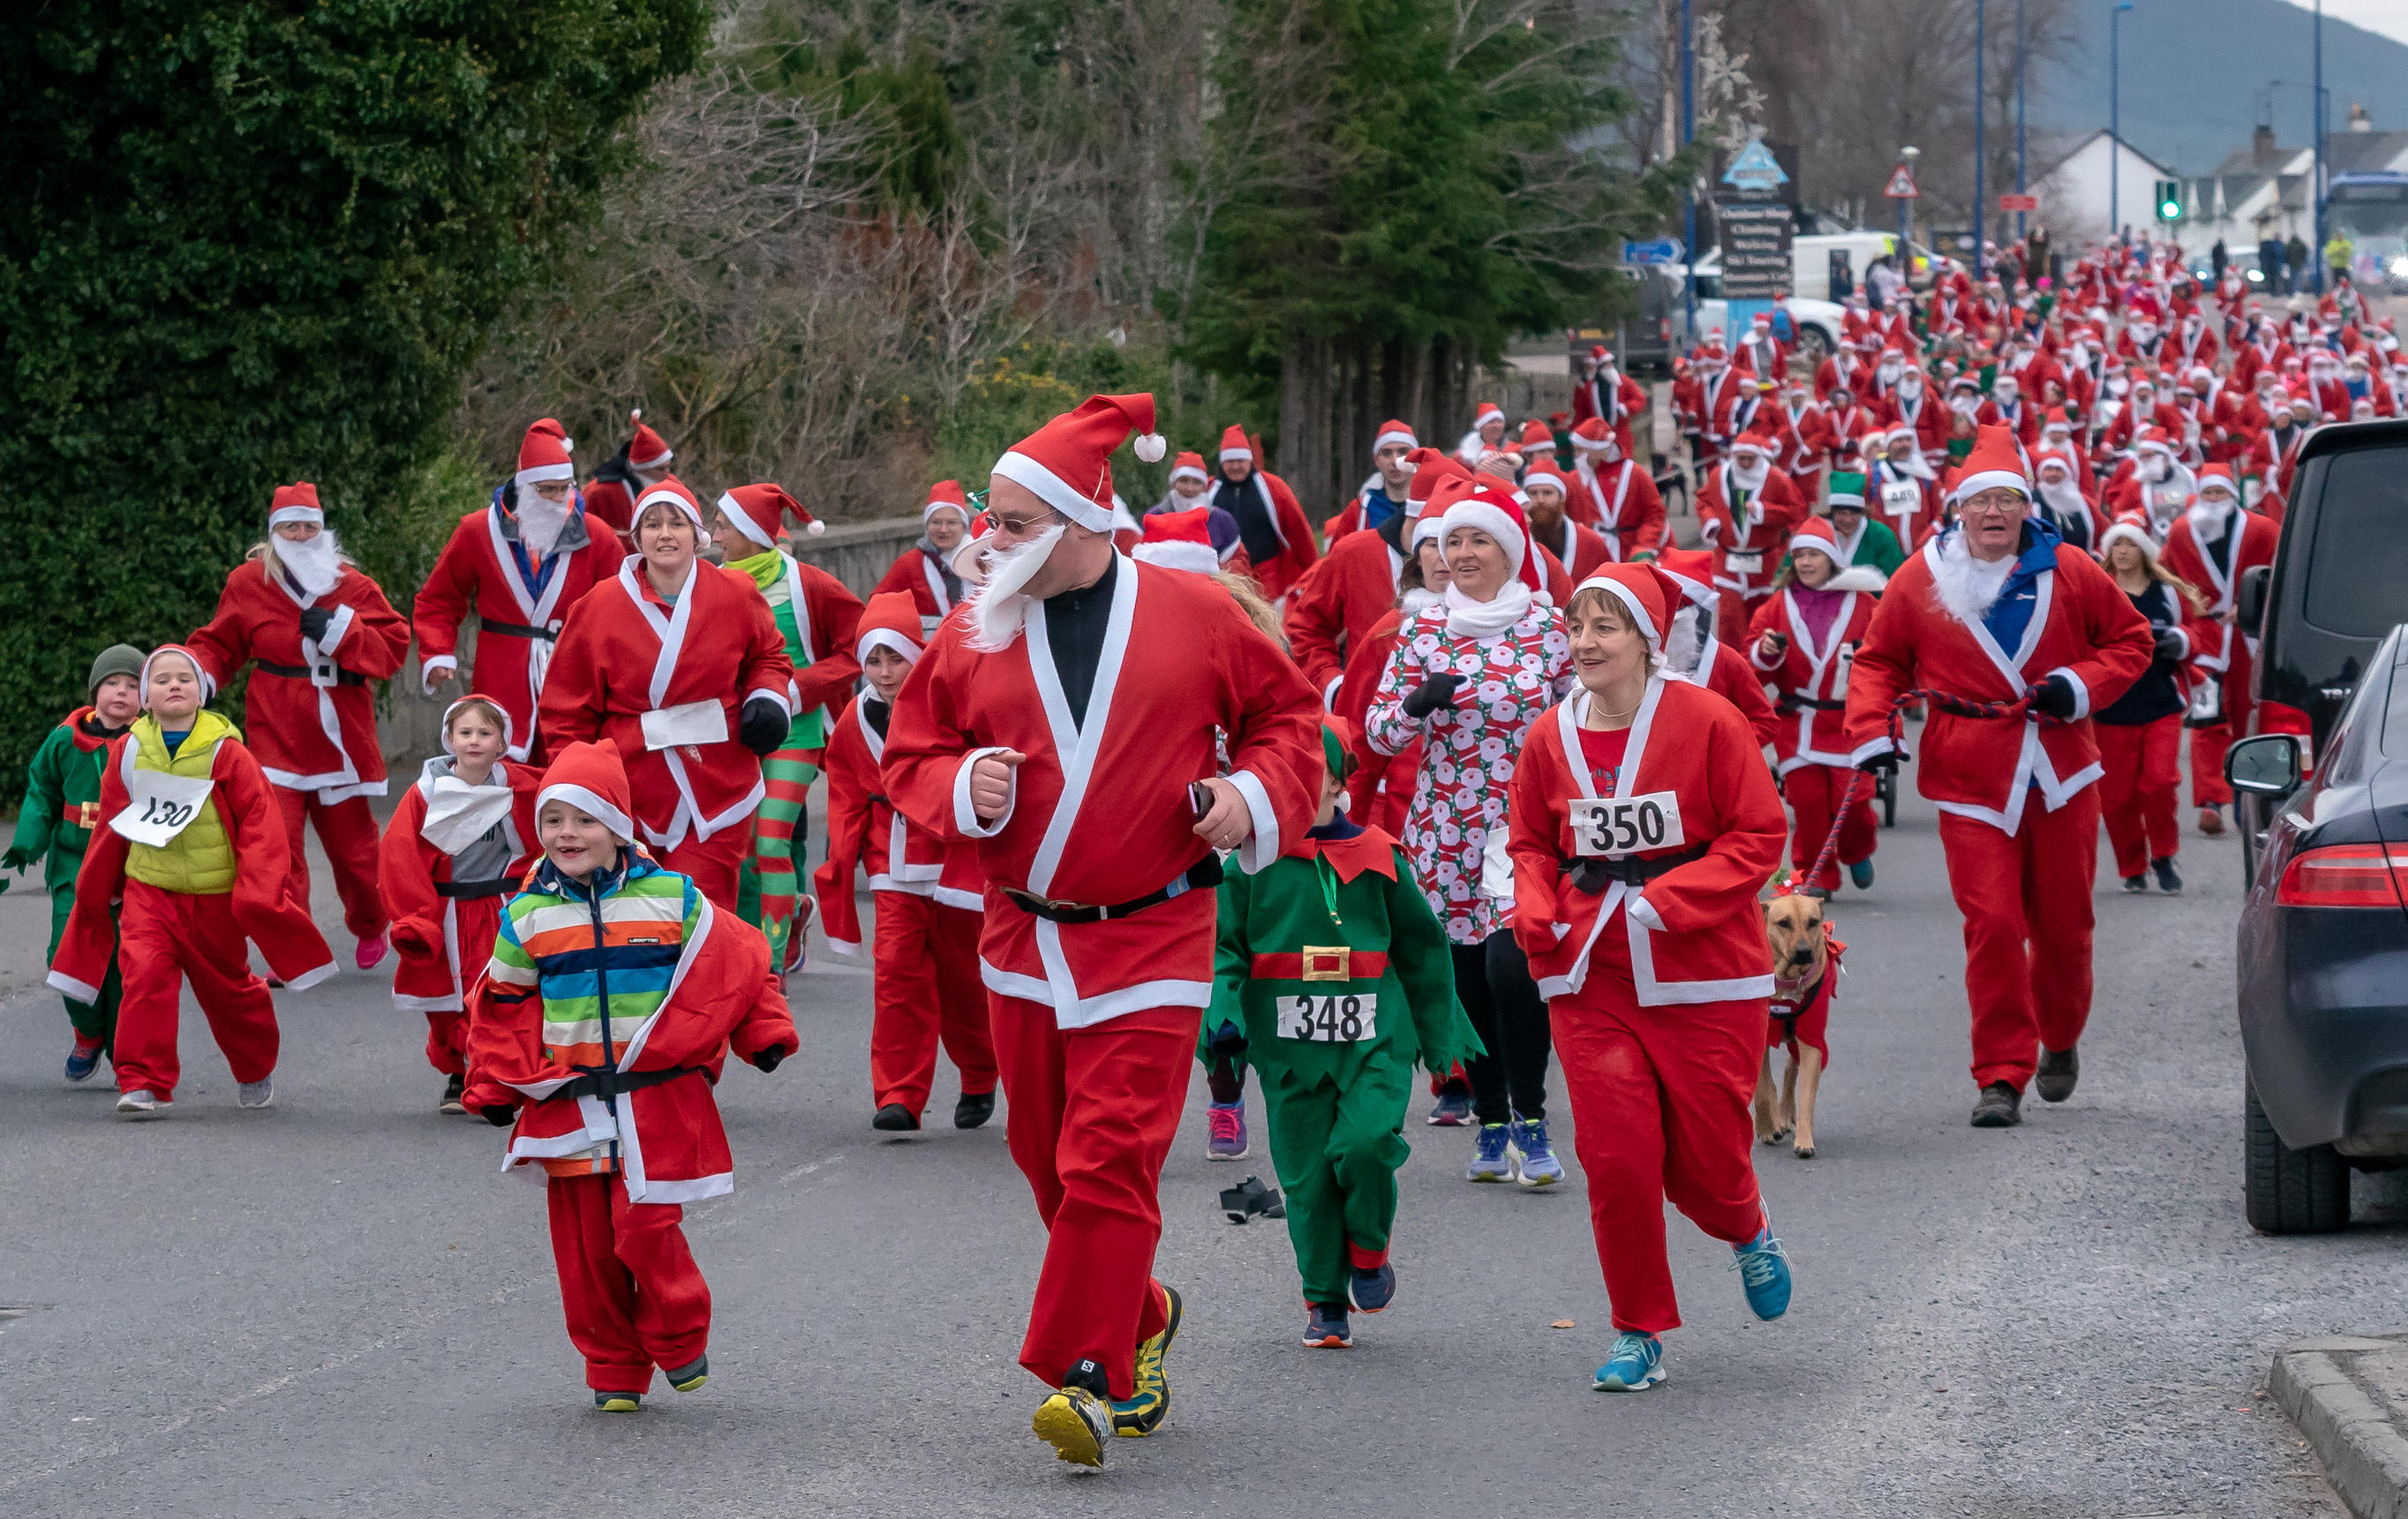 Hundreds of Santa's lined the streets of Aviemore for the 8th Annual Aviemore Santa Run.